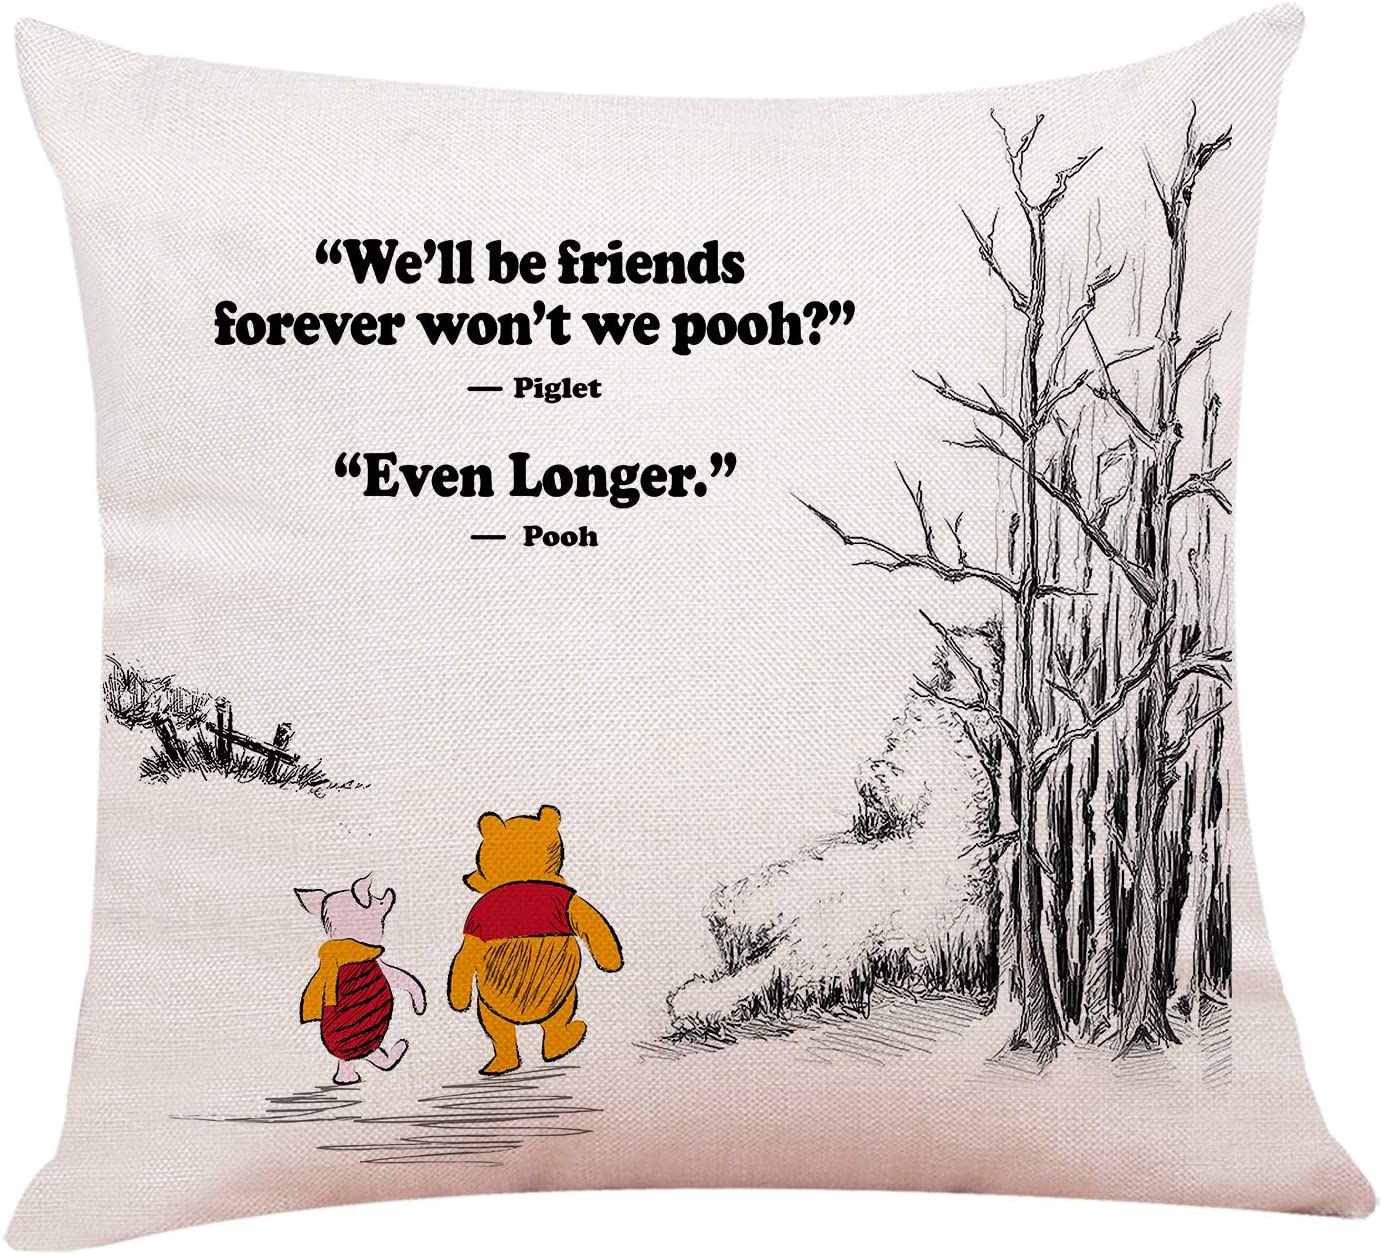 A Winnie the Pooh pillow case gift idea featuring Winnie and Piglet with a printed Winnie the Pooh quote on the pillow case.